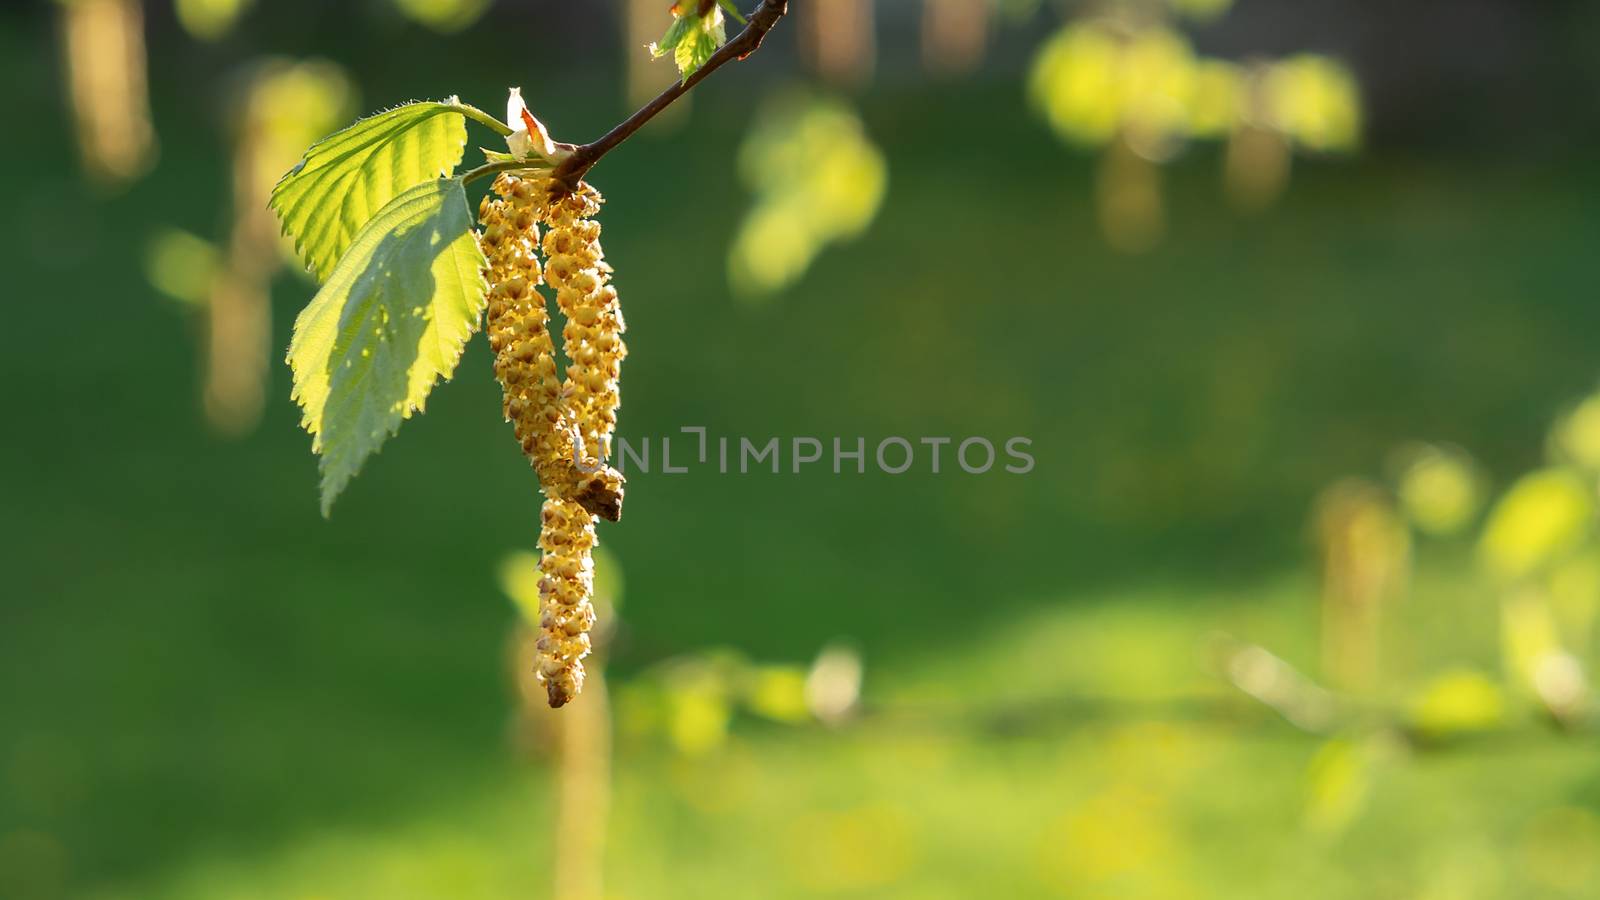 Birch catkins in spring park close-up, allergies to pollen of spring flowering plants concept.